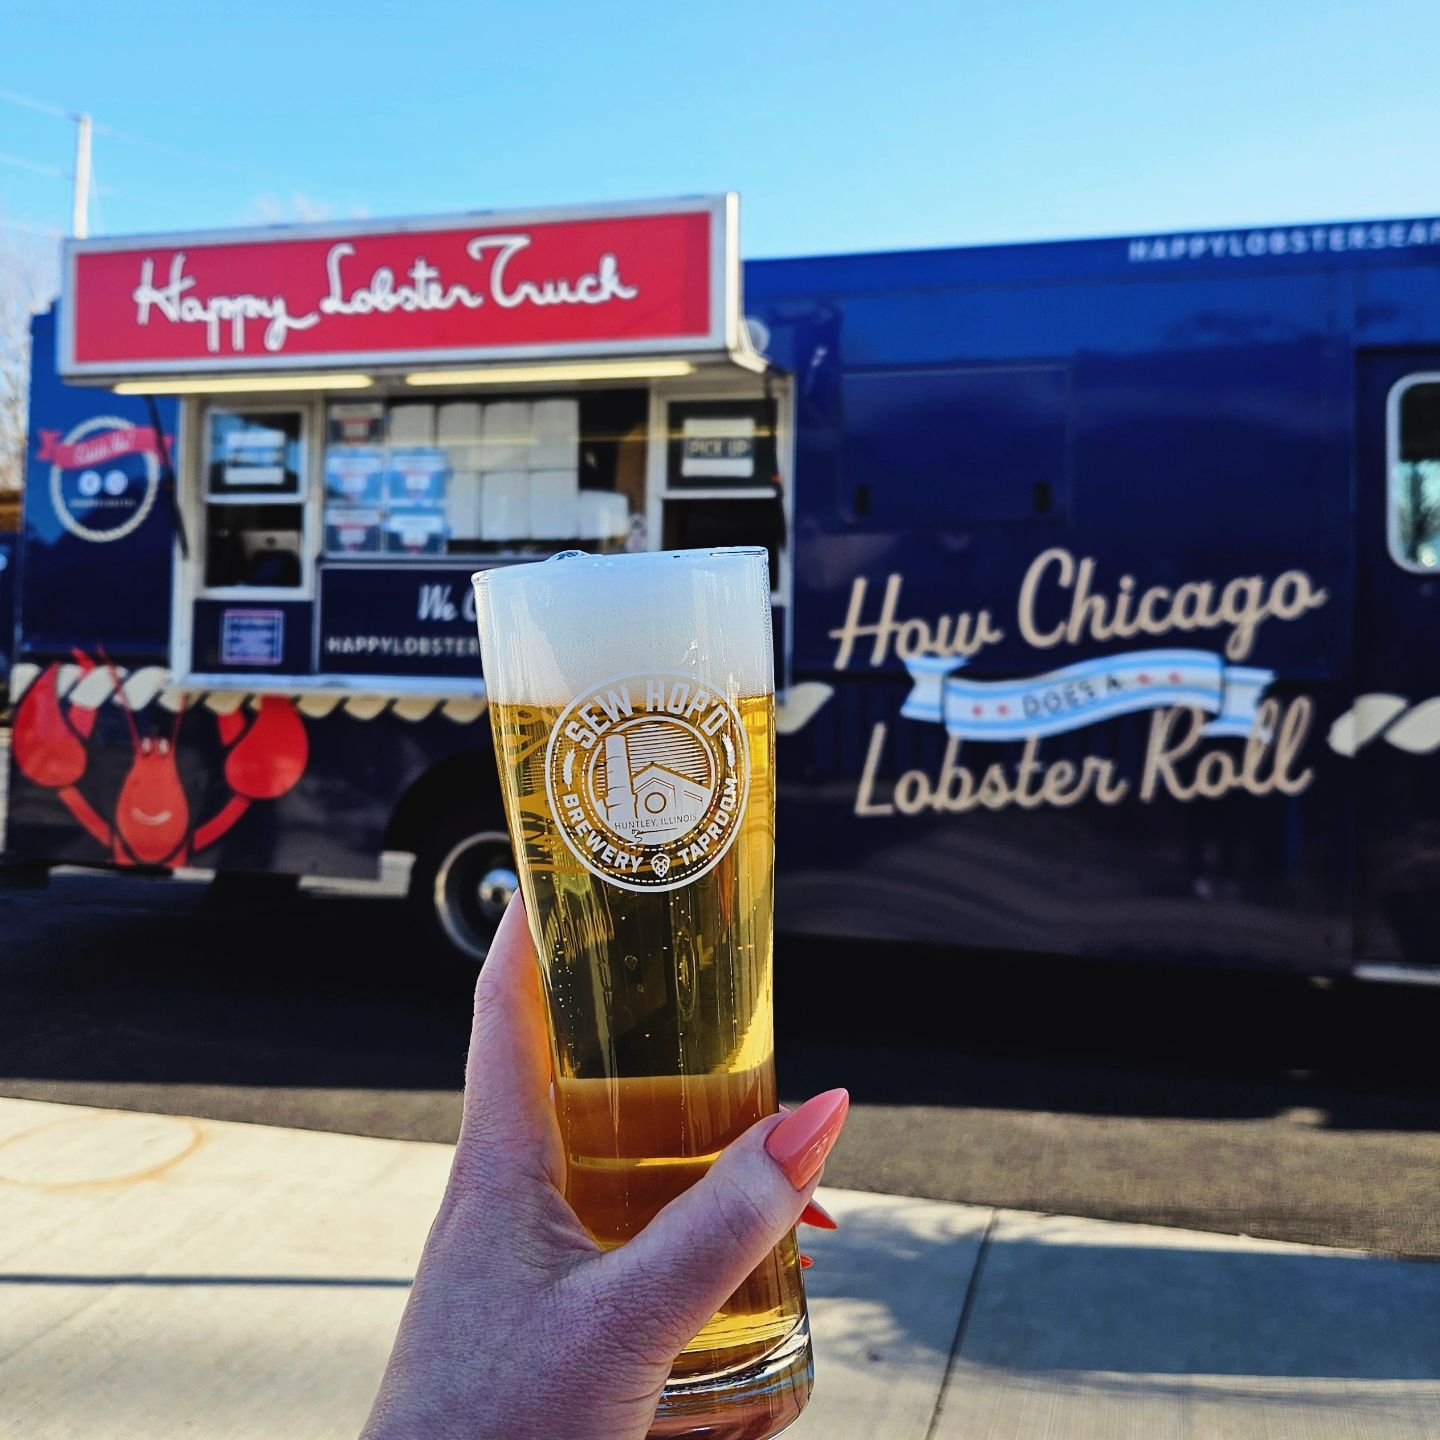 Thirsty Thursday is calling! 🍻 Join us at your favorite hometown brewery tonight as @happylobsterchi rolls up from 5-8 pm. Craving lobster rolls... 🦞 Pre-order NOW through the link on our Facebook events page&mdash;preordering closes at 4 pm sharp!